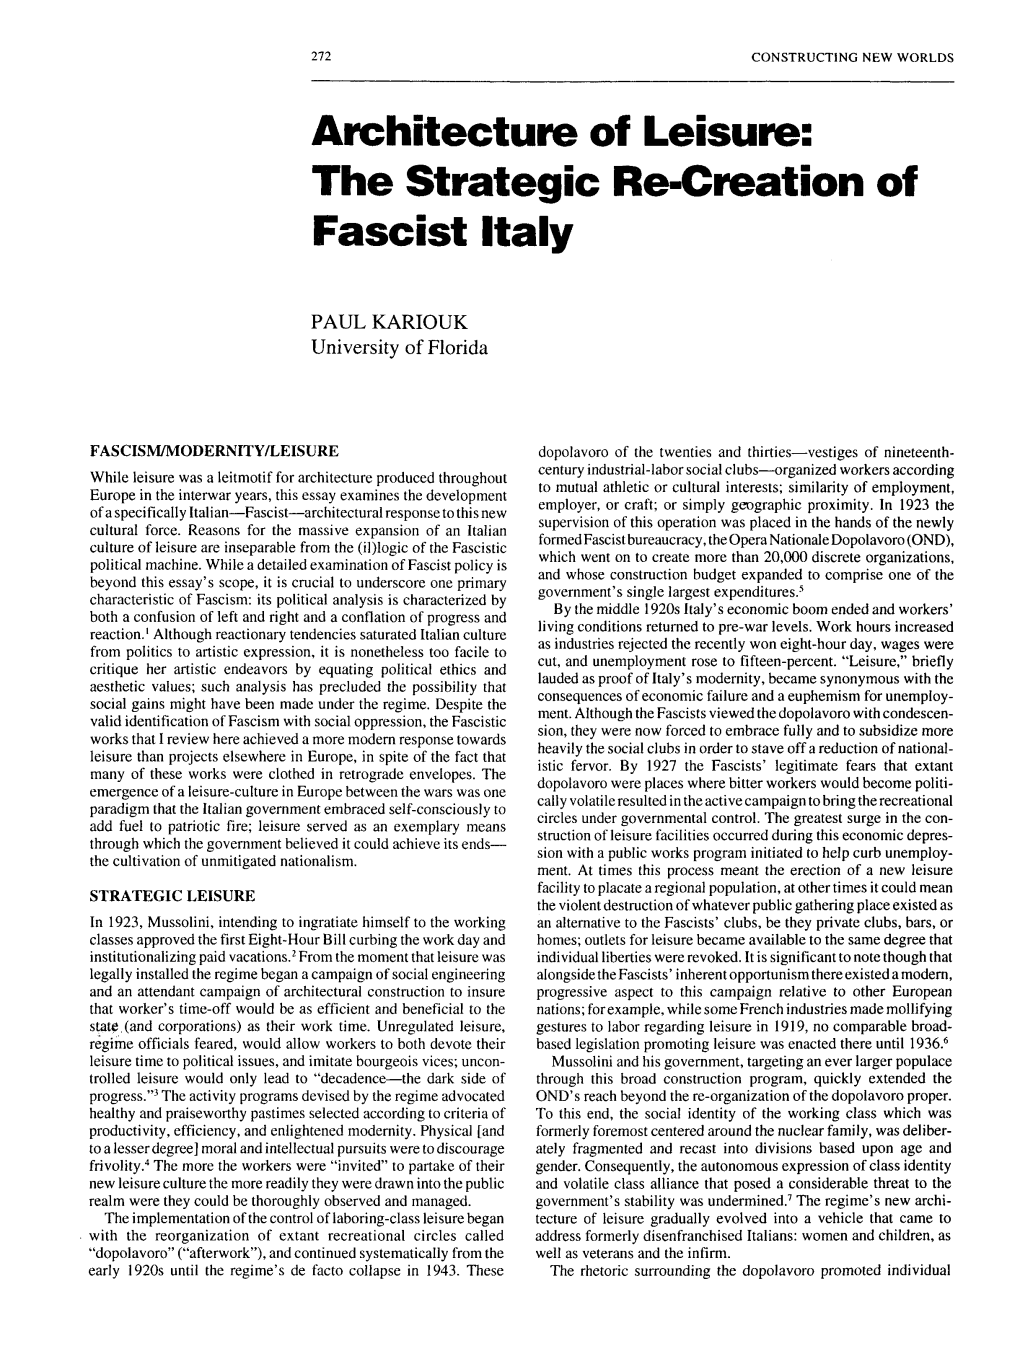 Architecture of Leisure: the Strategic Re-Creation of Fascist Italy